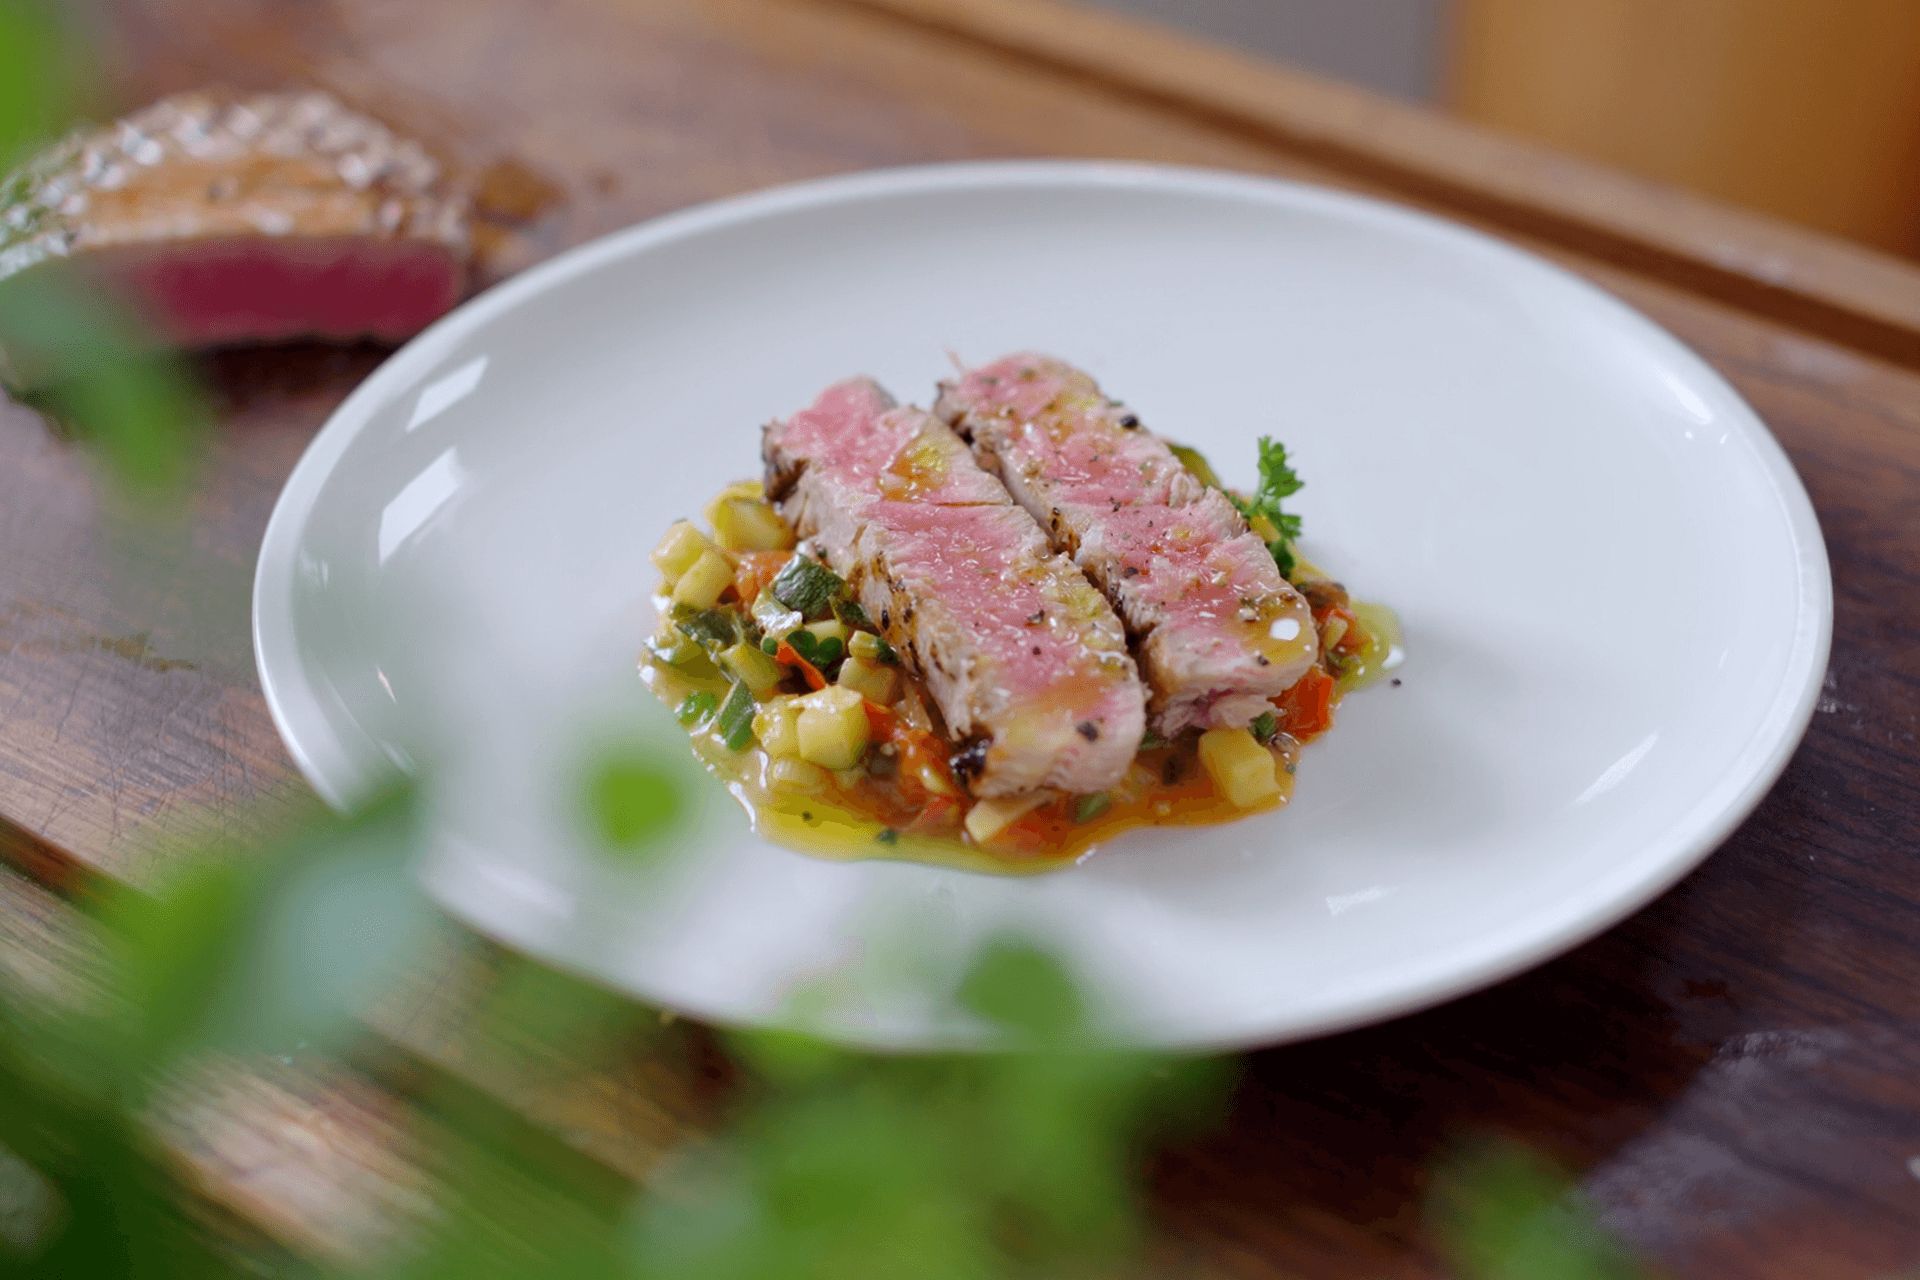 Tuna steak with pan-fried vegetables